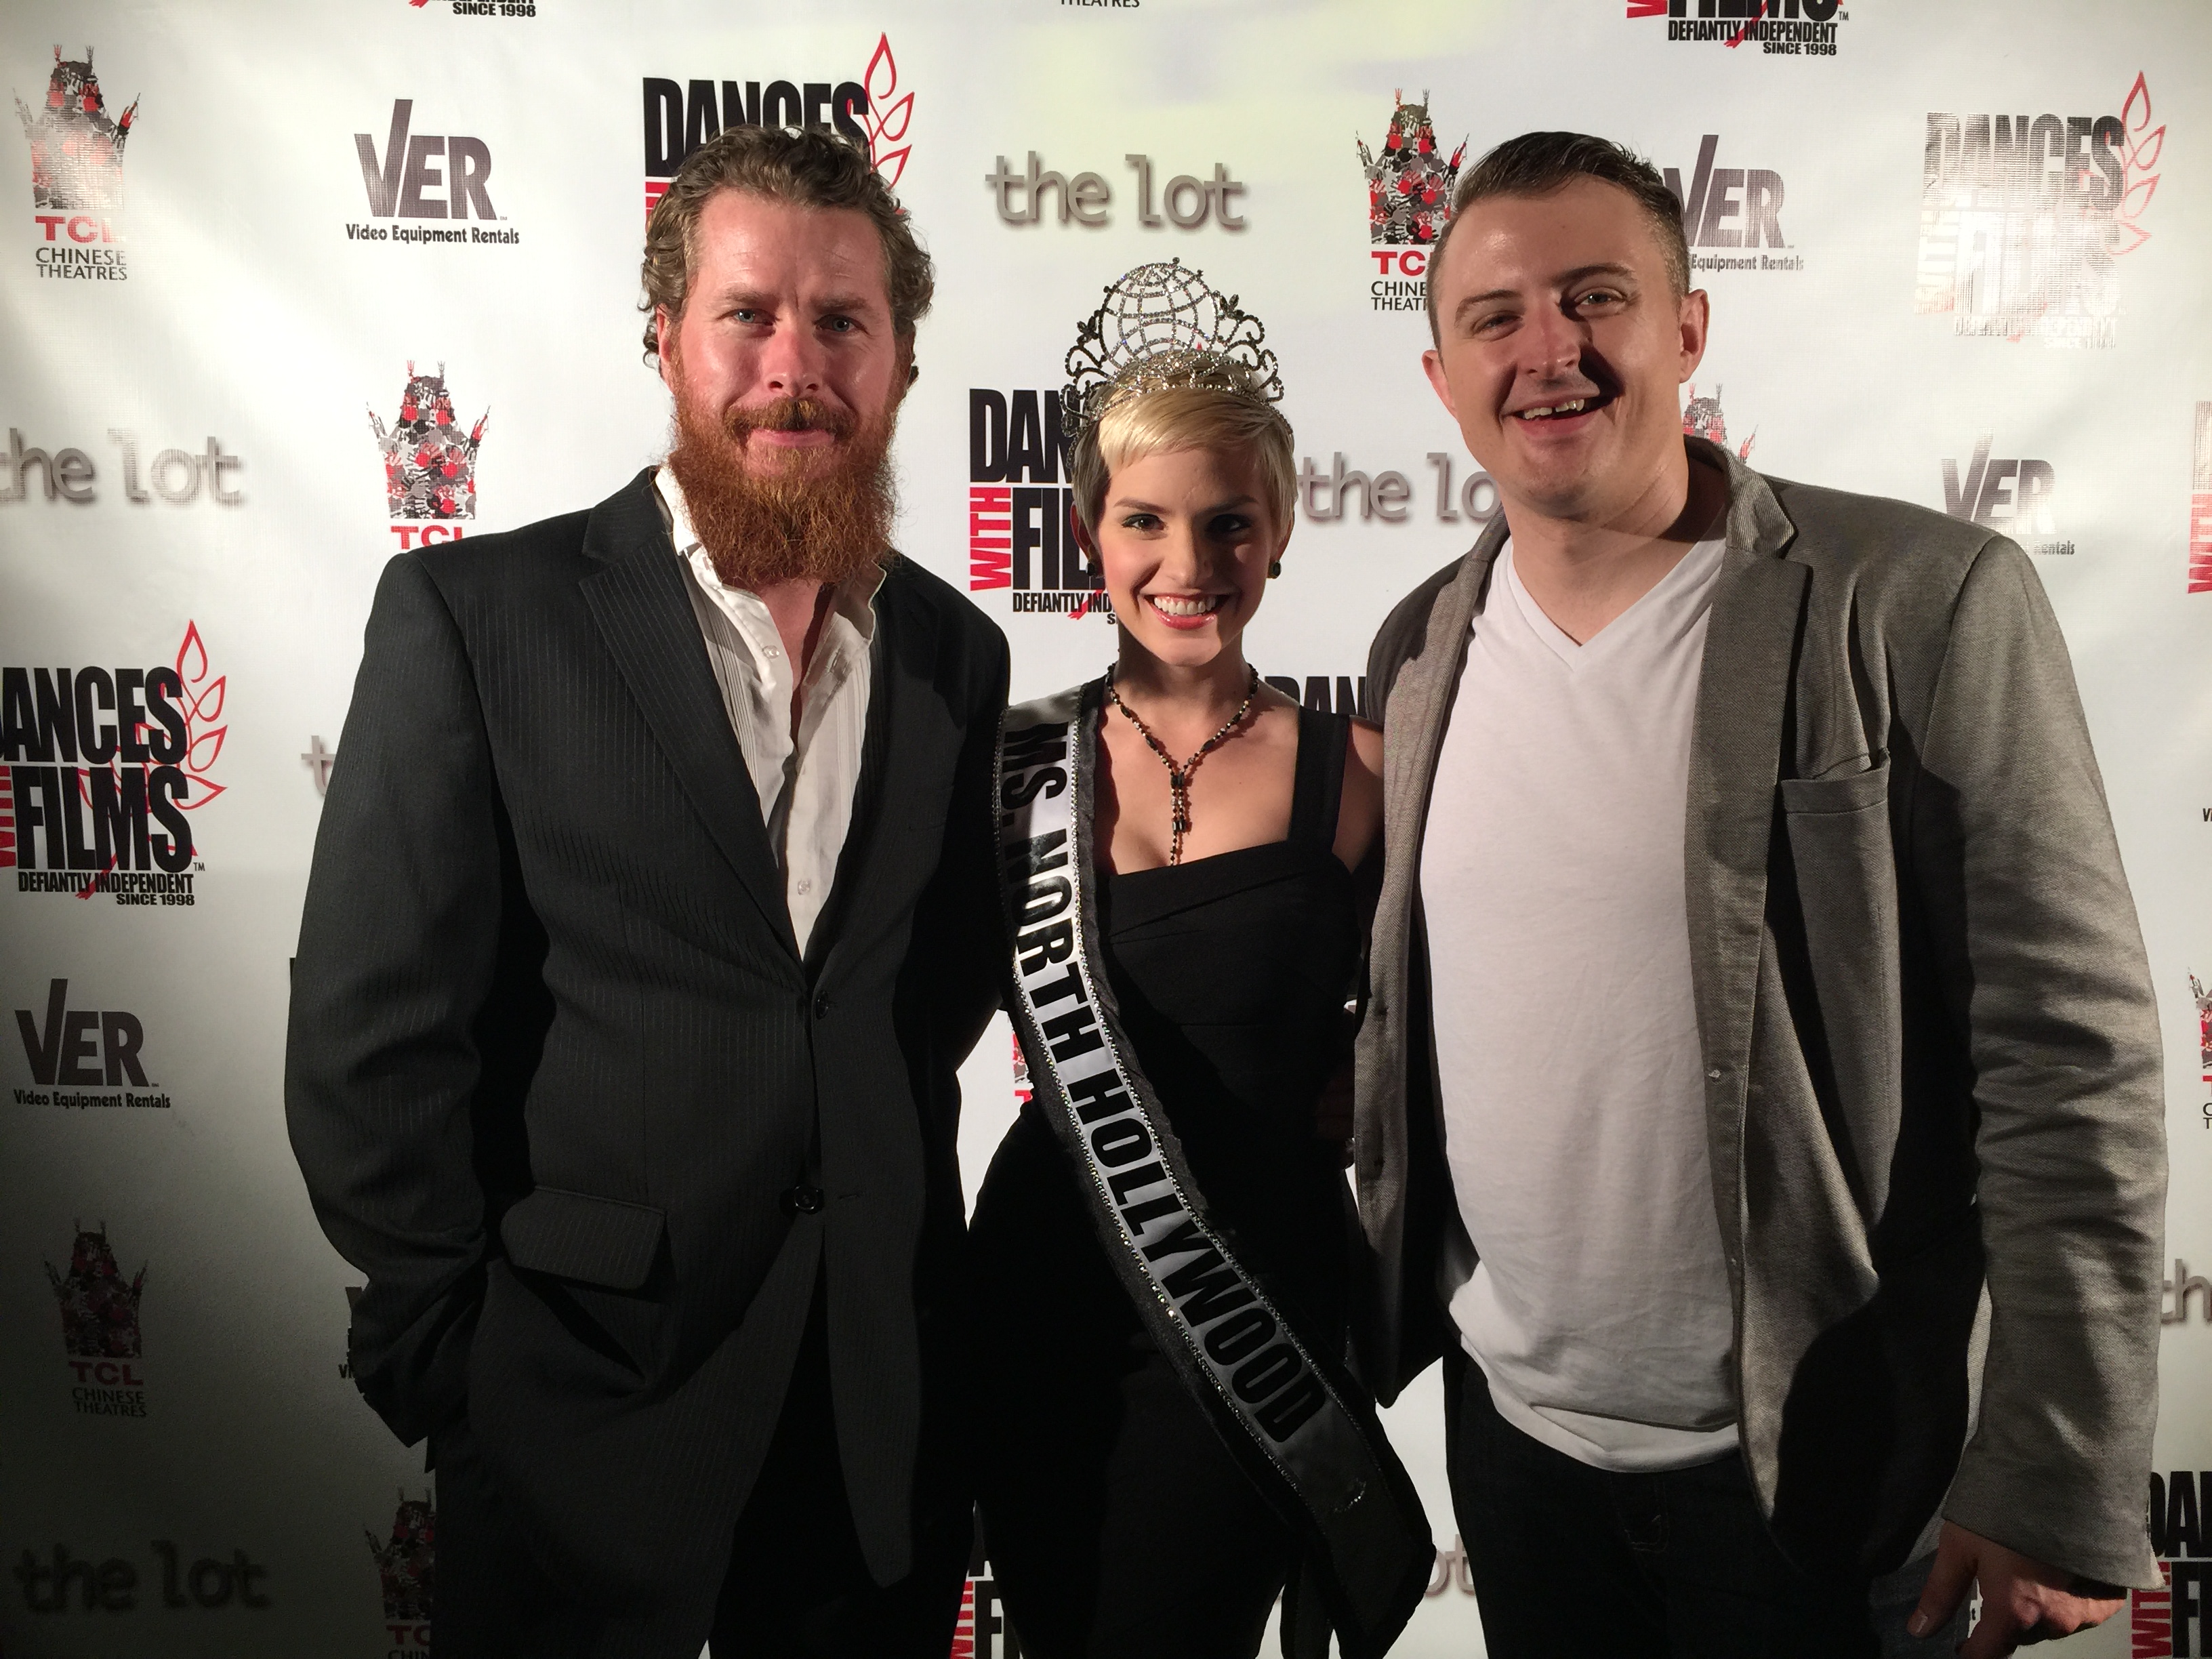 Dances With Films 2015 with Two Guys and a Film founders Canyon Prince and James Thomas.